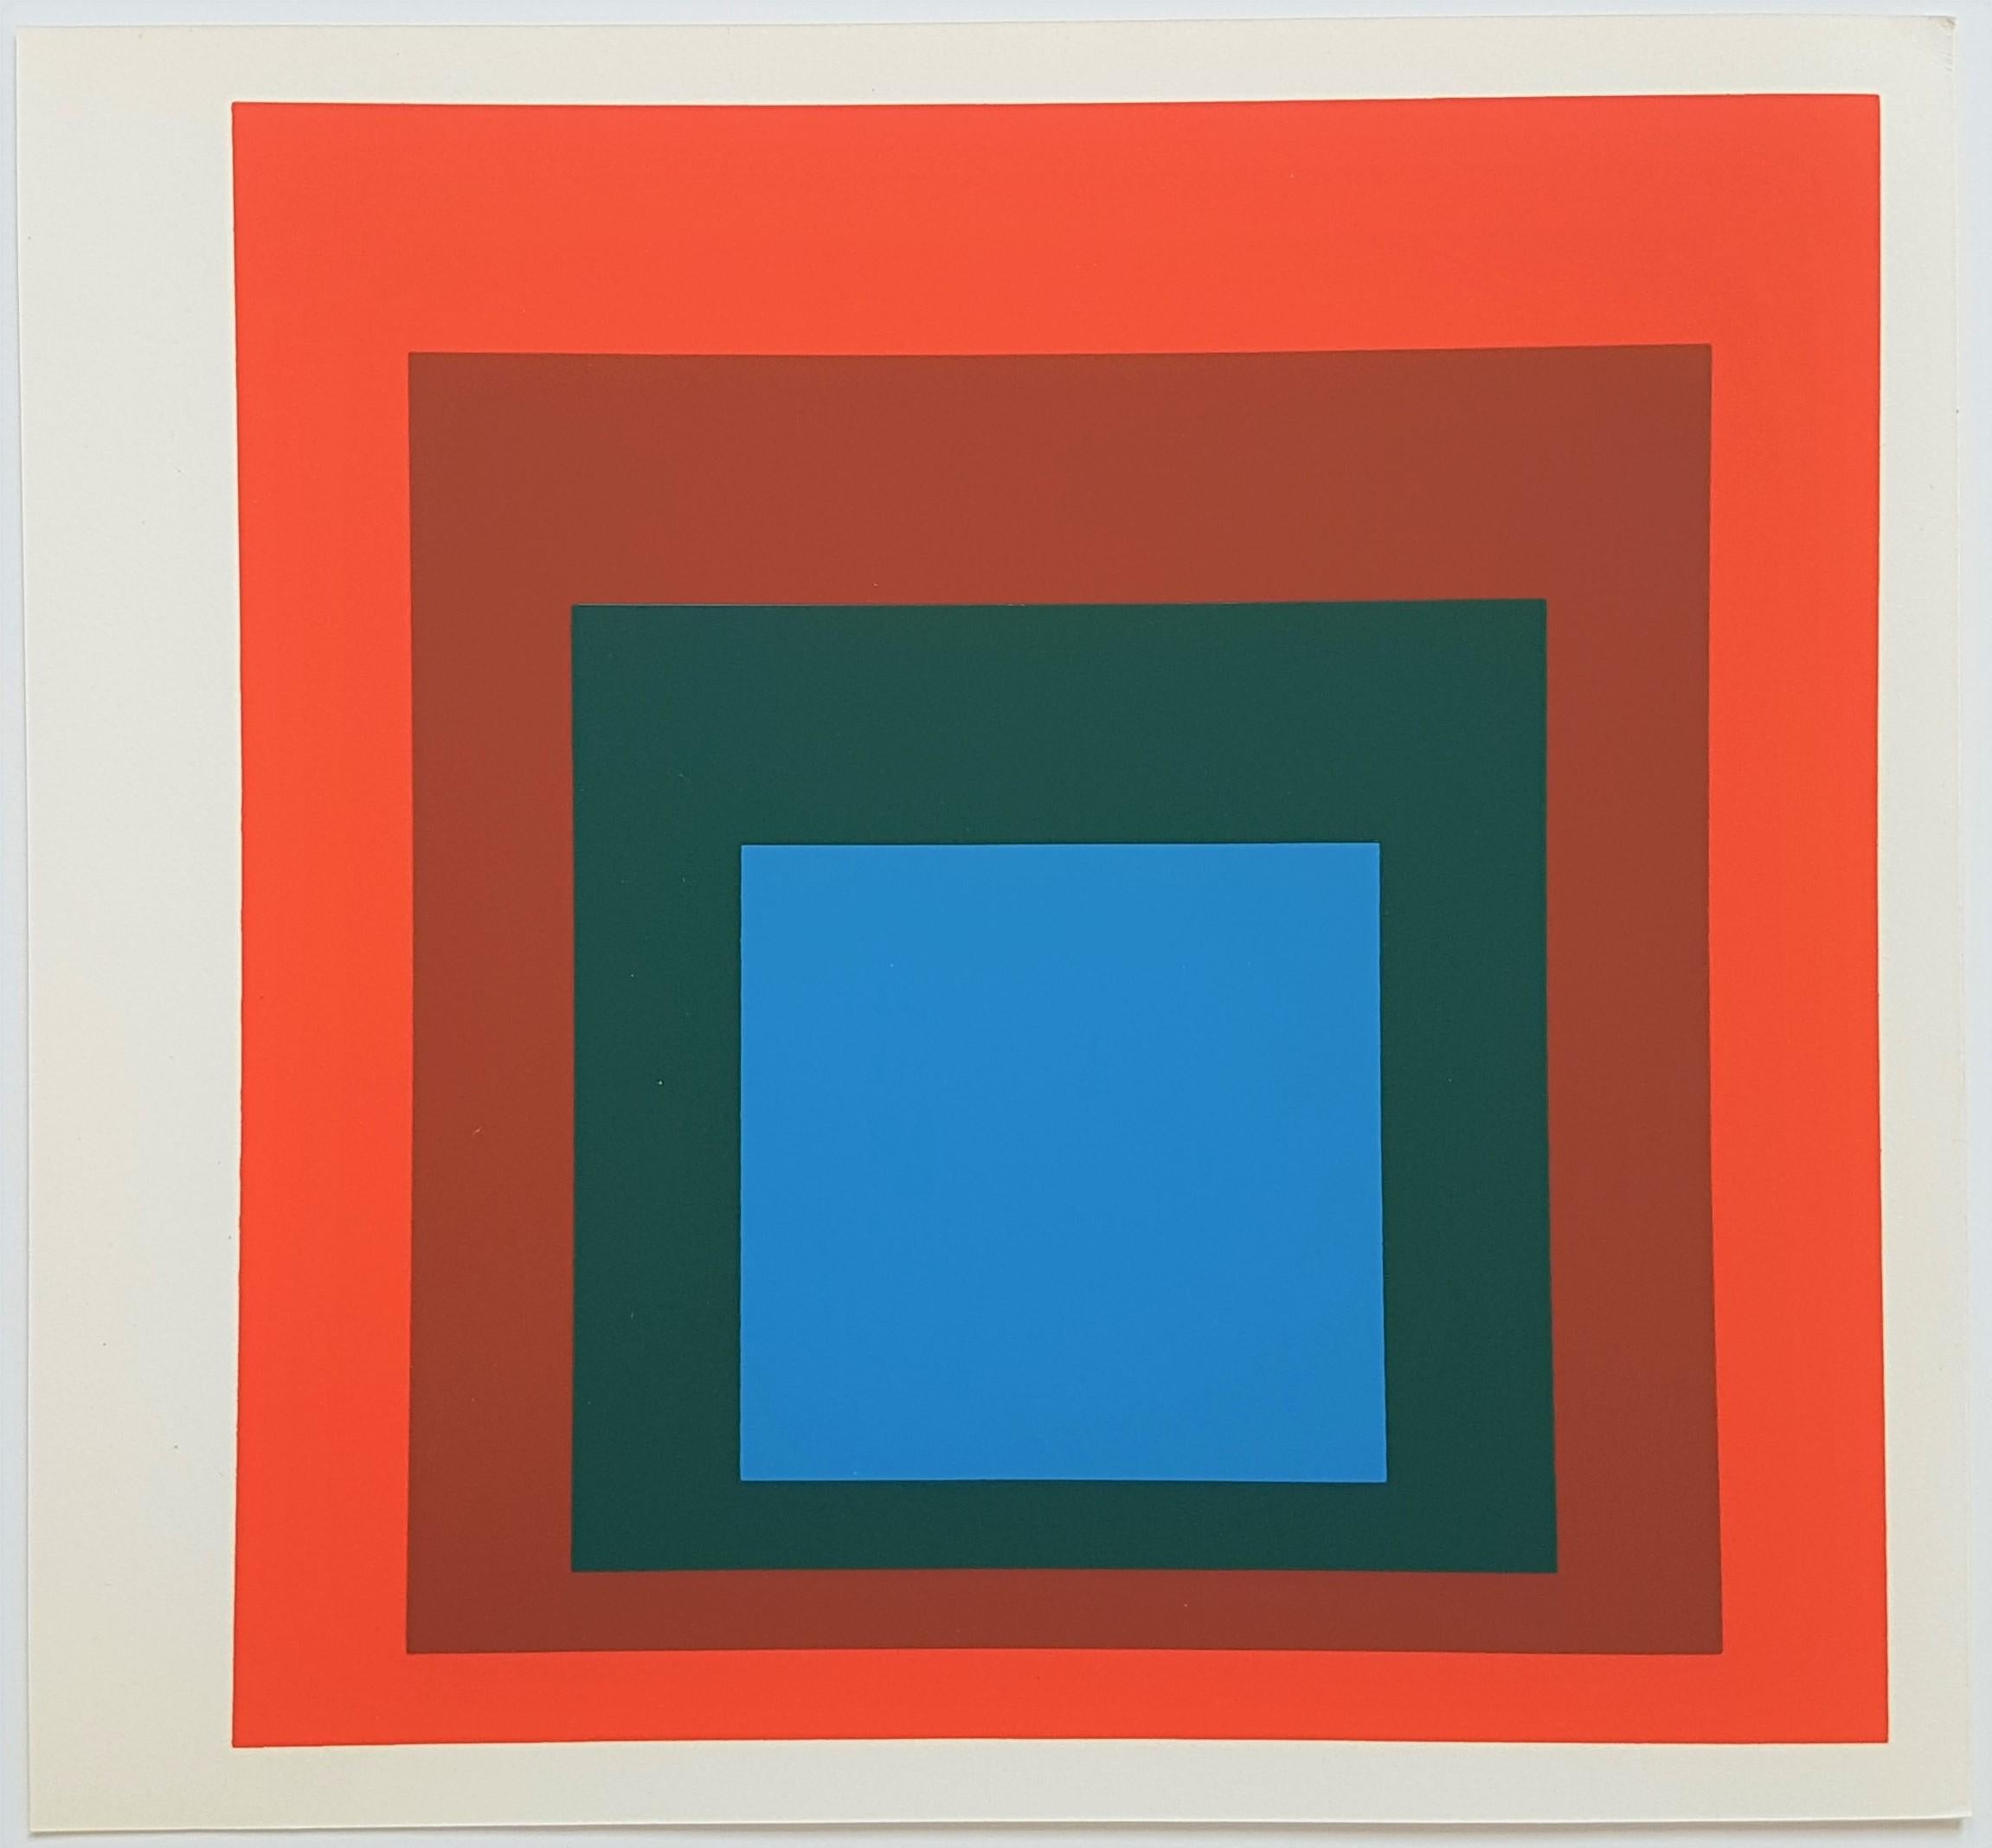 (after) Josef Albers Abstract Print - Homage to the Square: Blue + Darkgreen with 2 Reds (~35% OFF LIST PRICE)